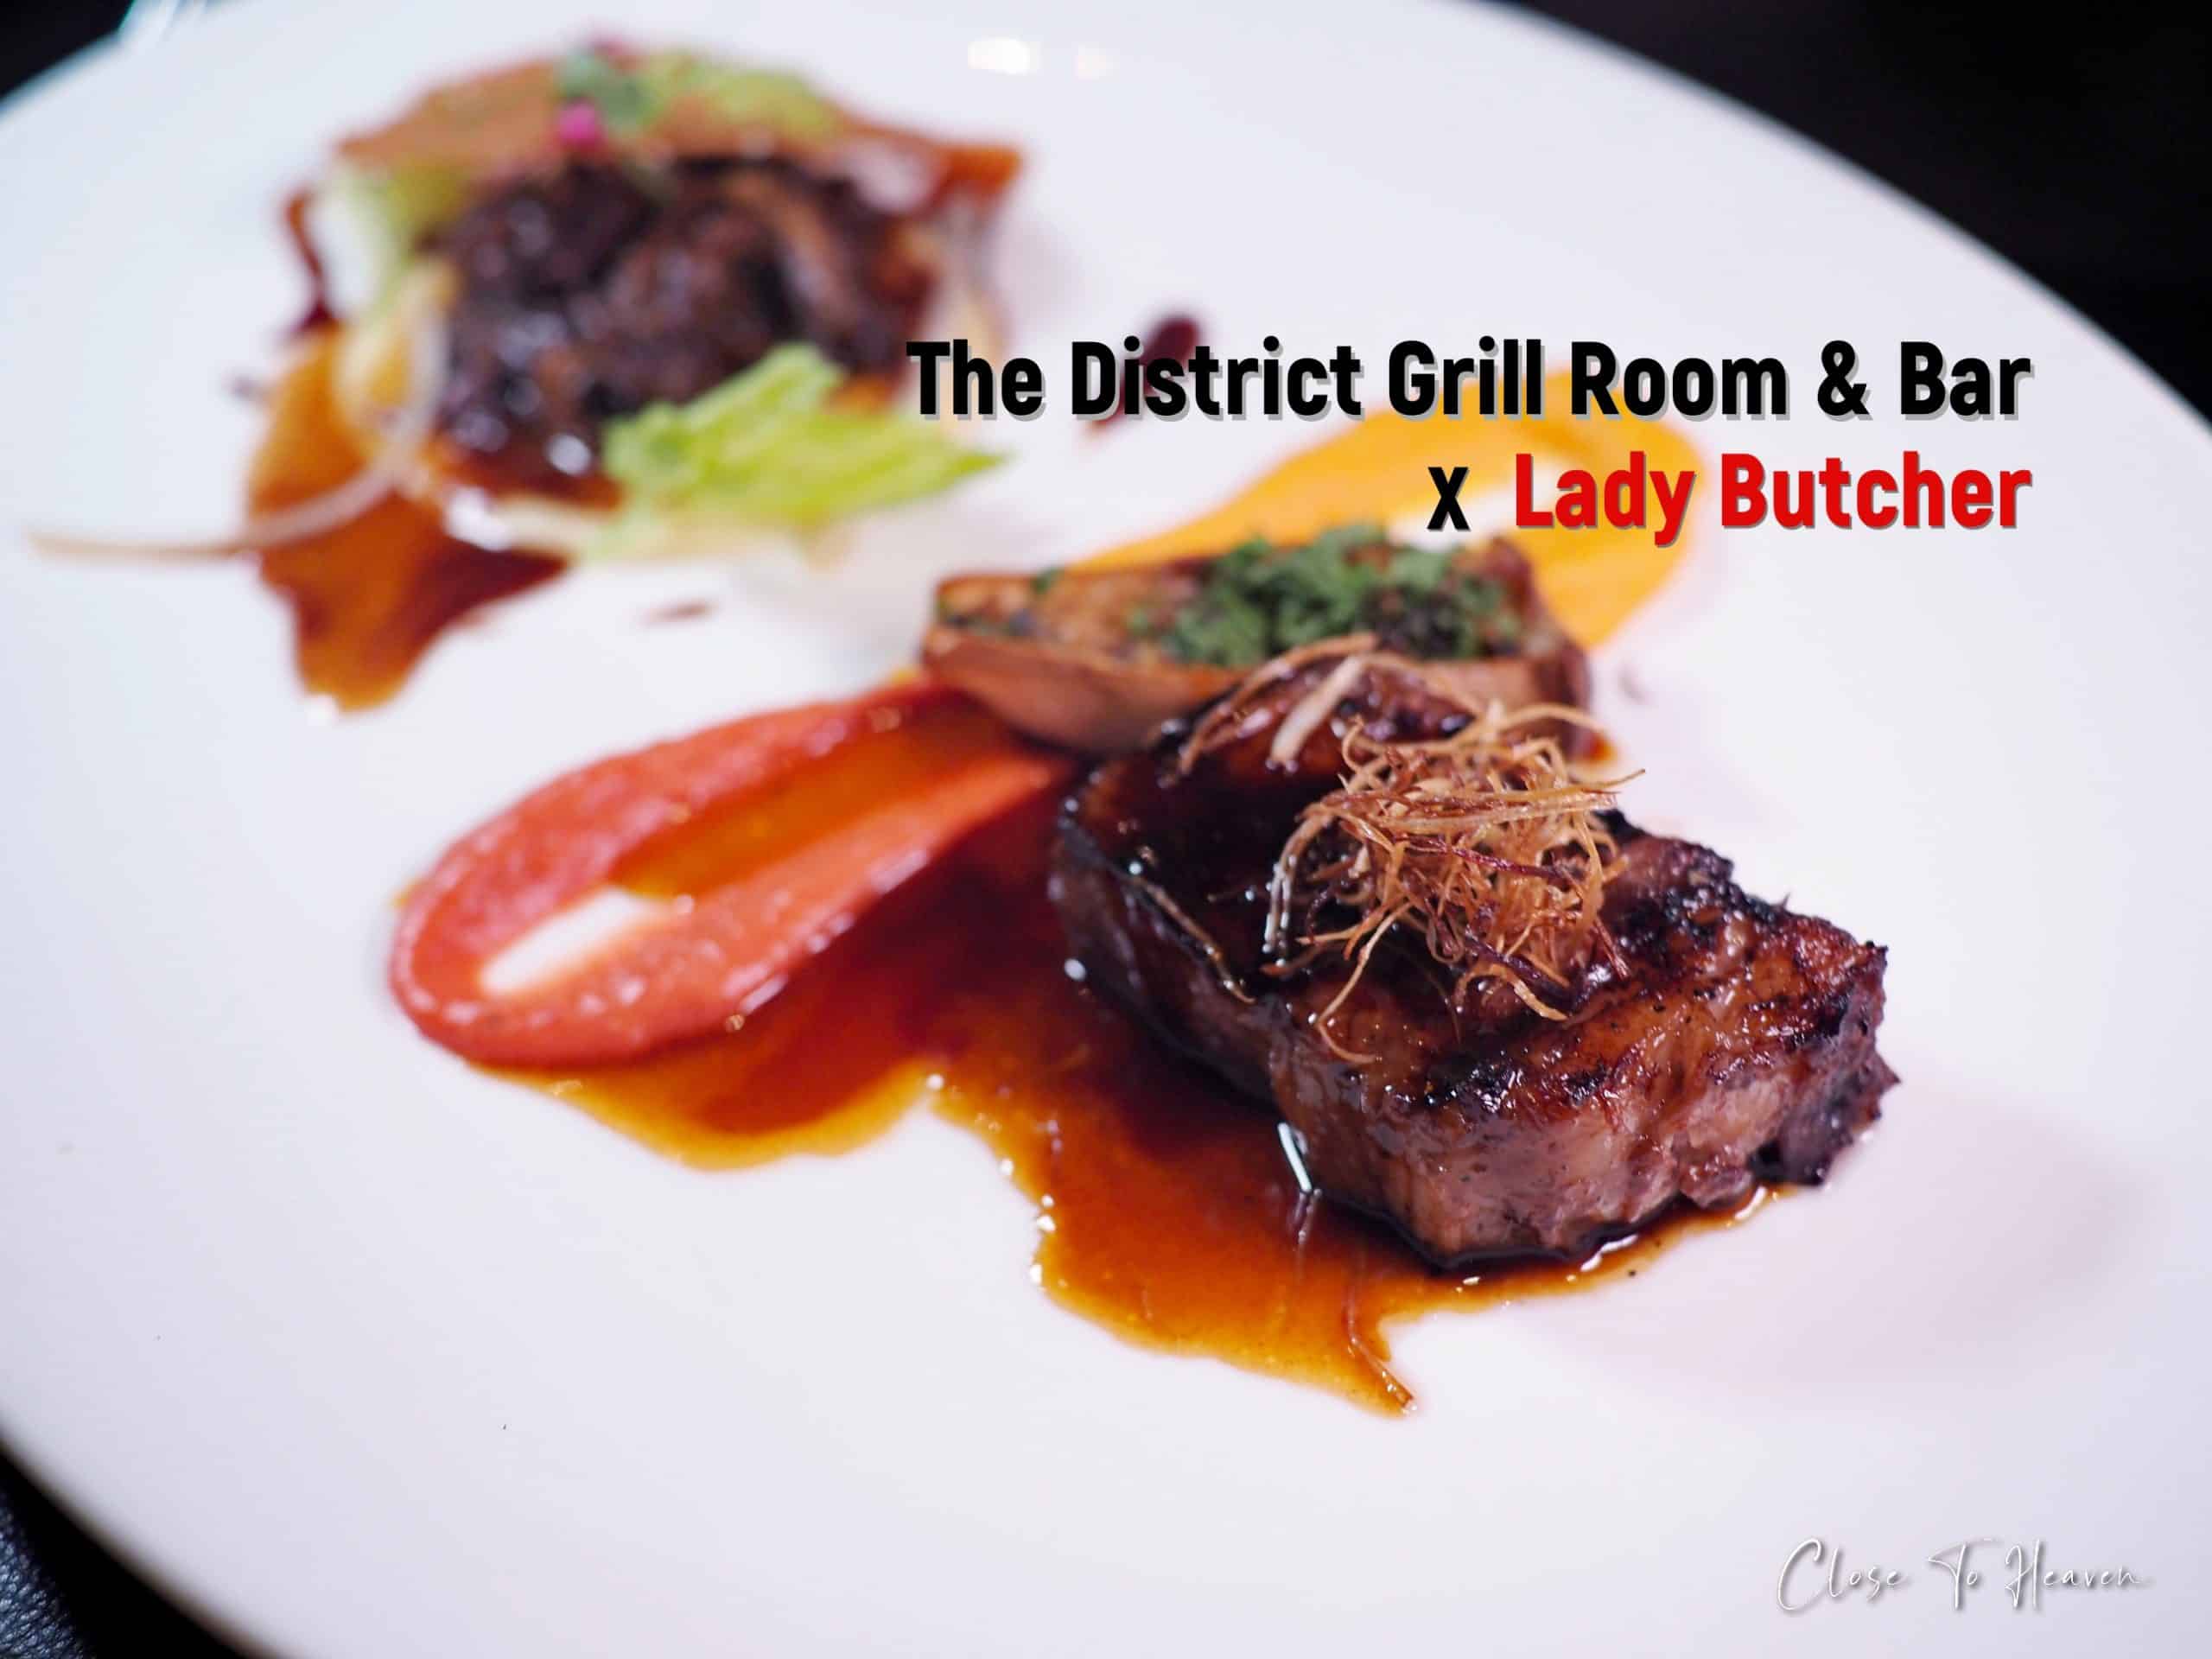 Four-Hand Dinner | Lady Butcher x The District Grill Room & Bar